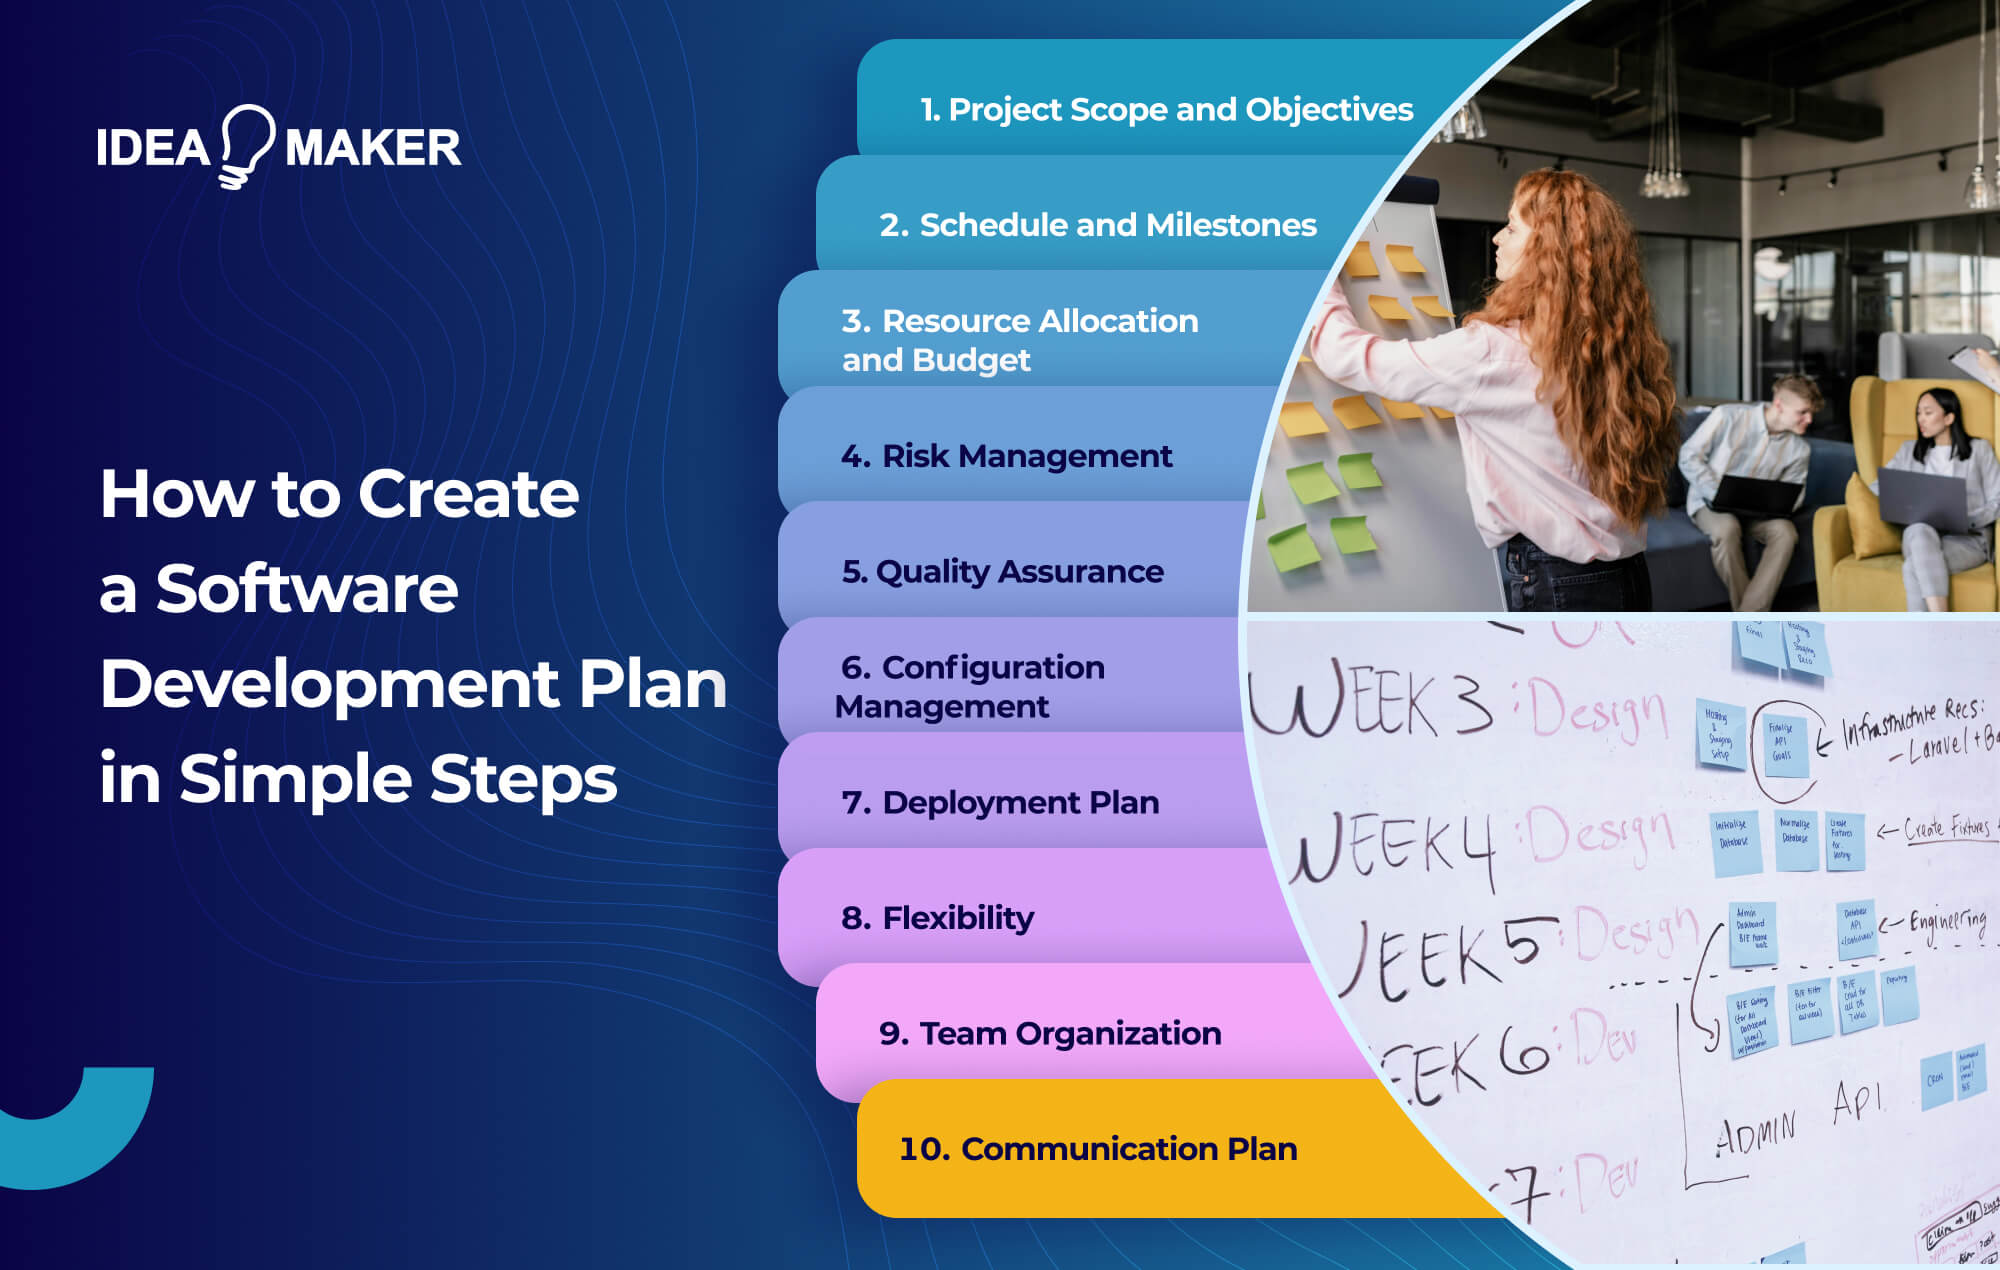 Ideamaker - How to Create a Software Development Plan in Simple Steps